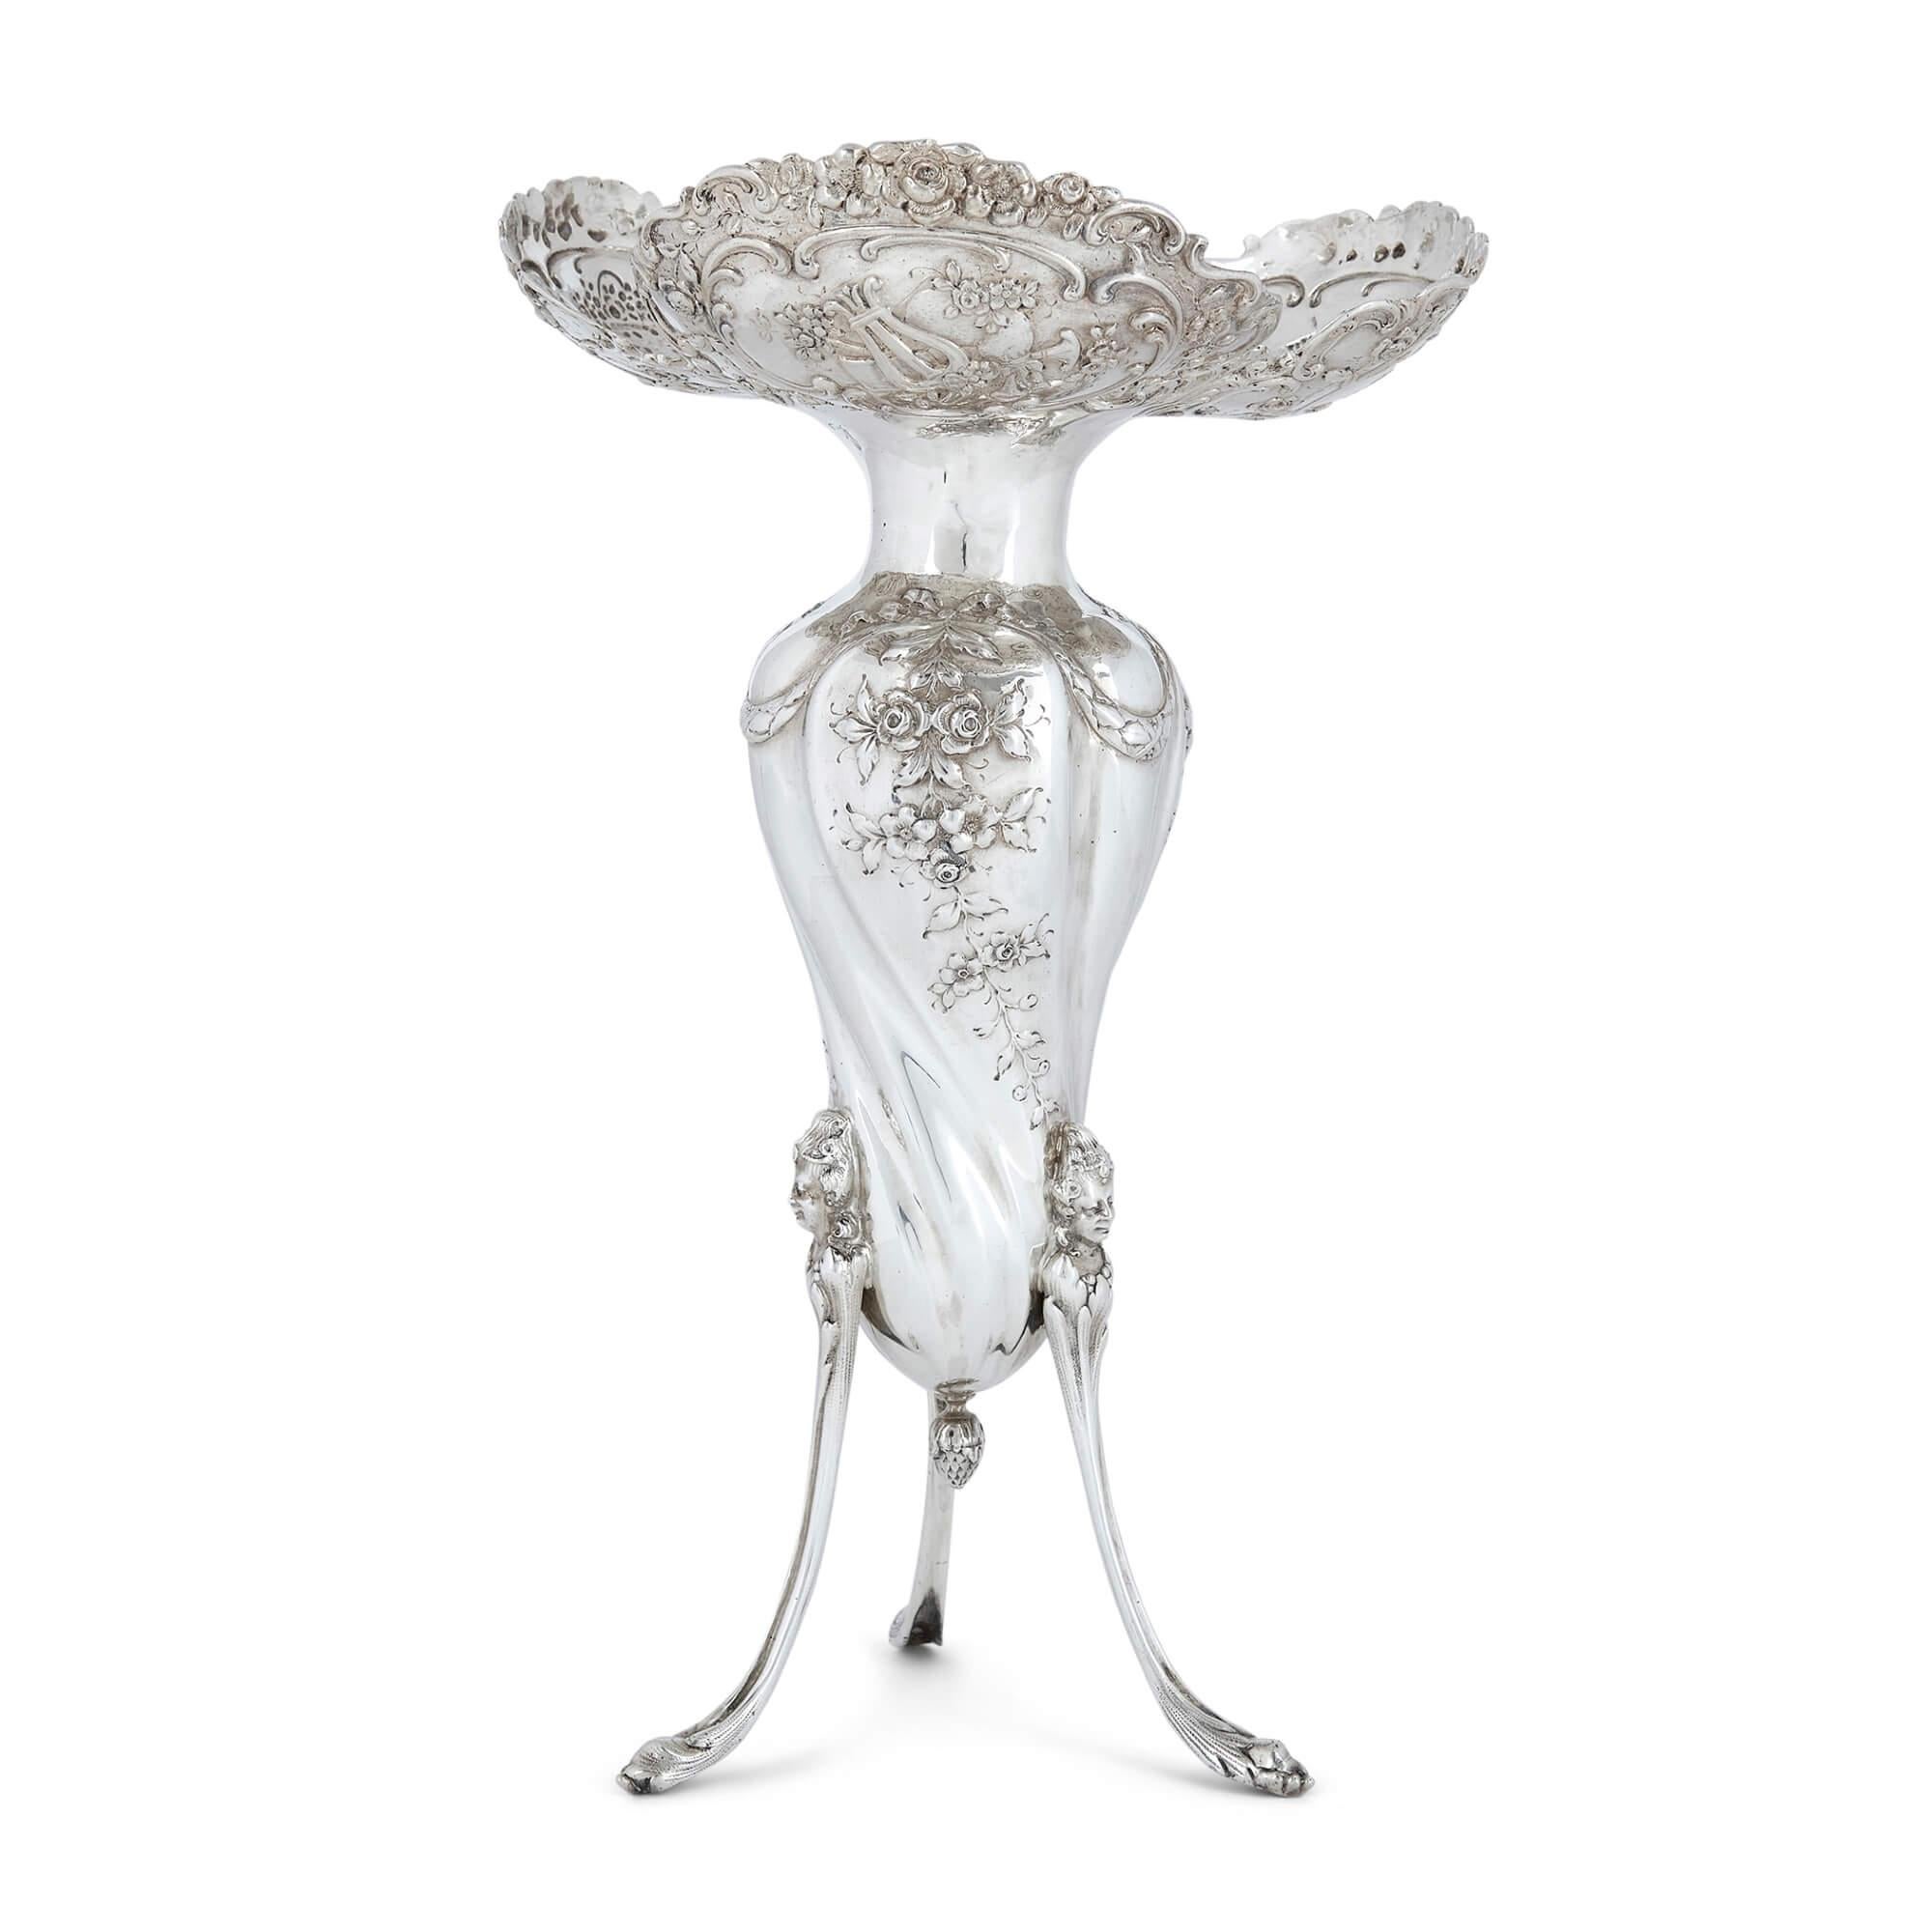 Pair of antique silver vases 
Continental, Late 19th Century 
Height 32cm, diameter 20cm

Crafted in the late 19th century, the design of these elegant vases is inspired by the Rococo style of the 18th century. 

The bulbous bodies taper towards the